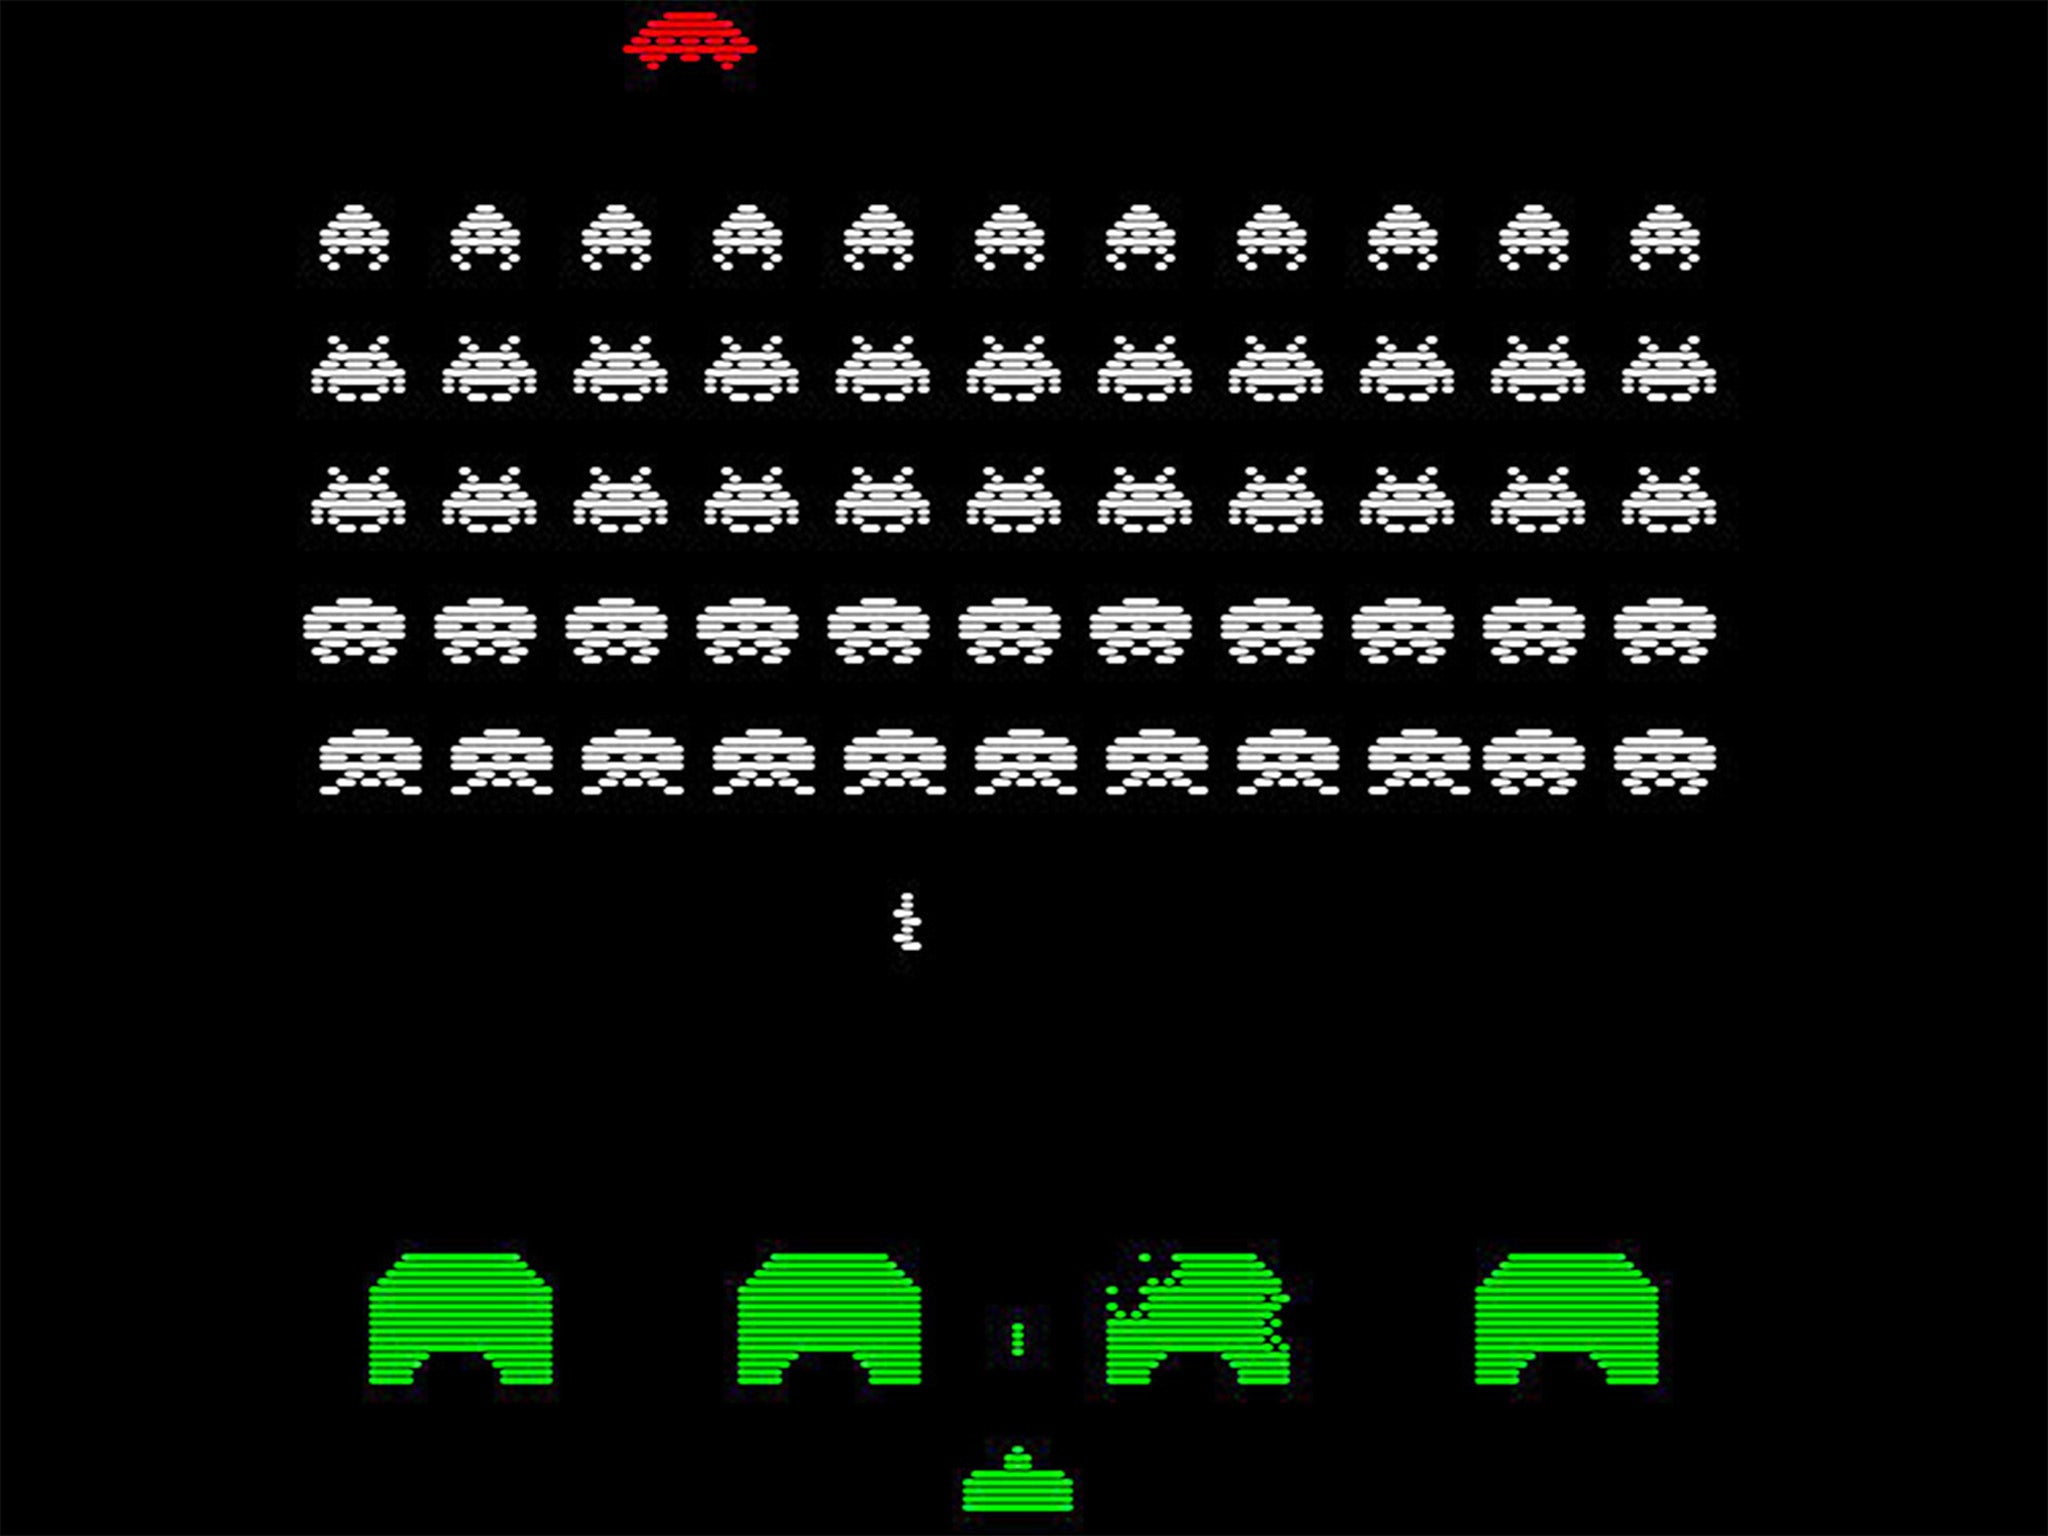 Space Invaders, one of the 49 classic Atari games that the Deep Q-network has mastered